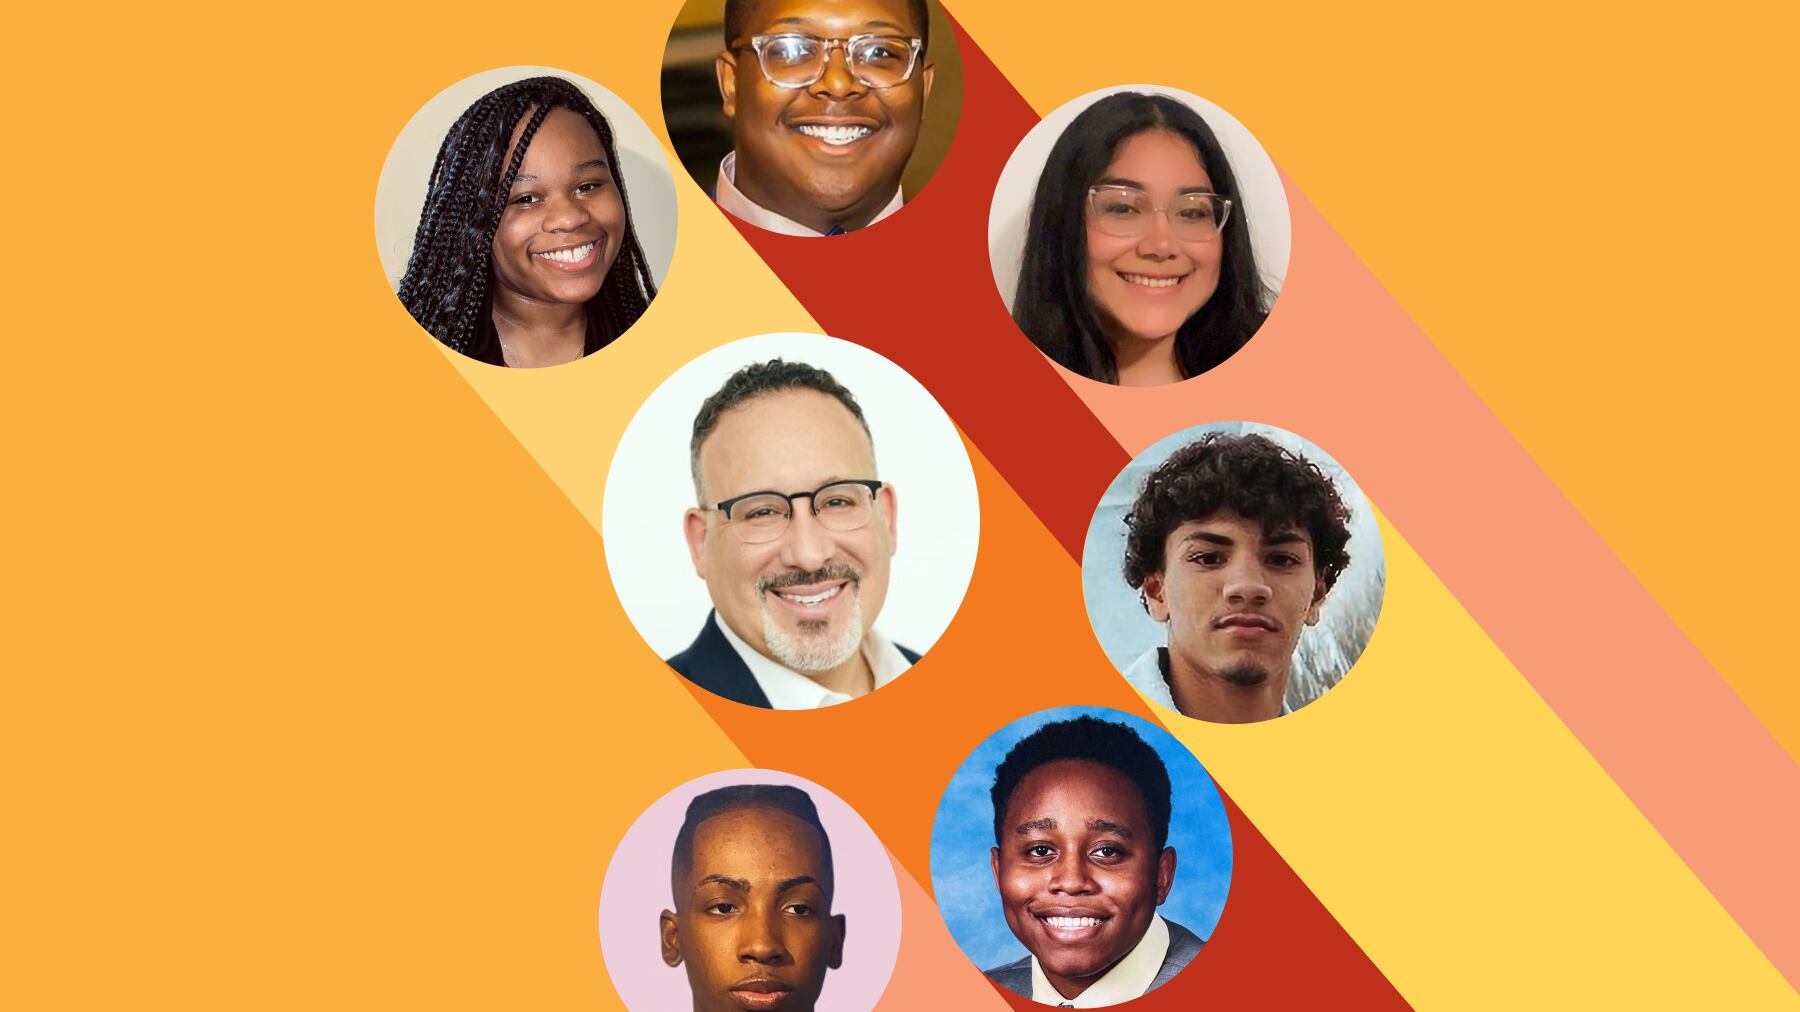 (Clockwise from top left) Portraits of Chinaya Mason, Trey Cunningham, Elizabeth Jaramillo, Joaquin Martinez, Kenneth Usoh, Zadane Russell and Secretary of Education Miguel Cardona sit within mulit-colored bubbles in a promotional graphic.